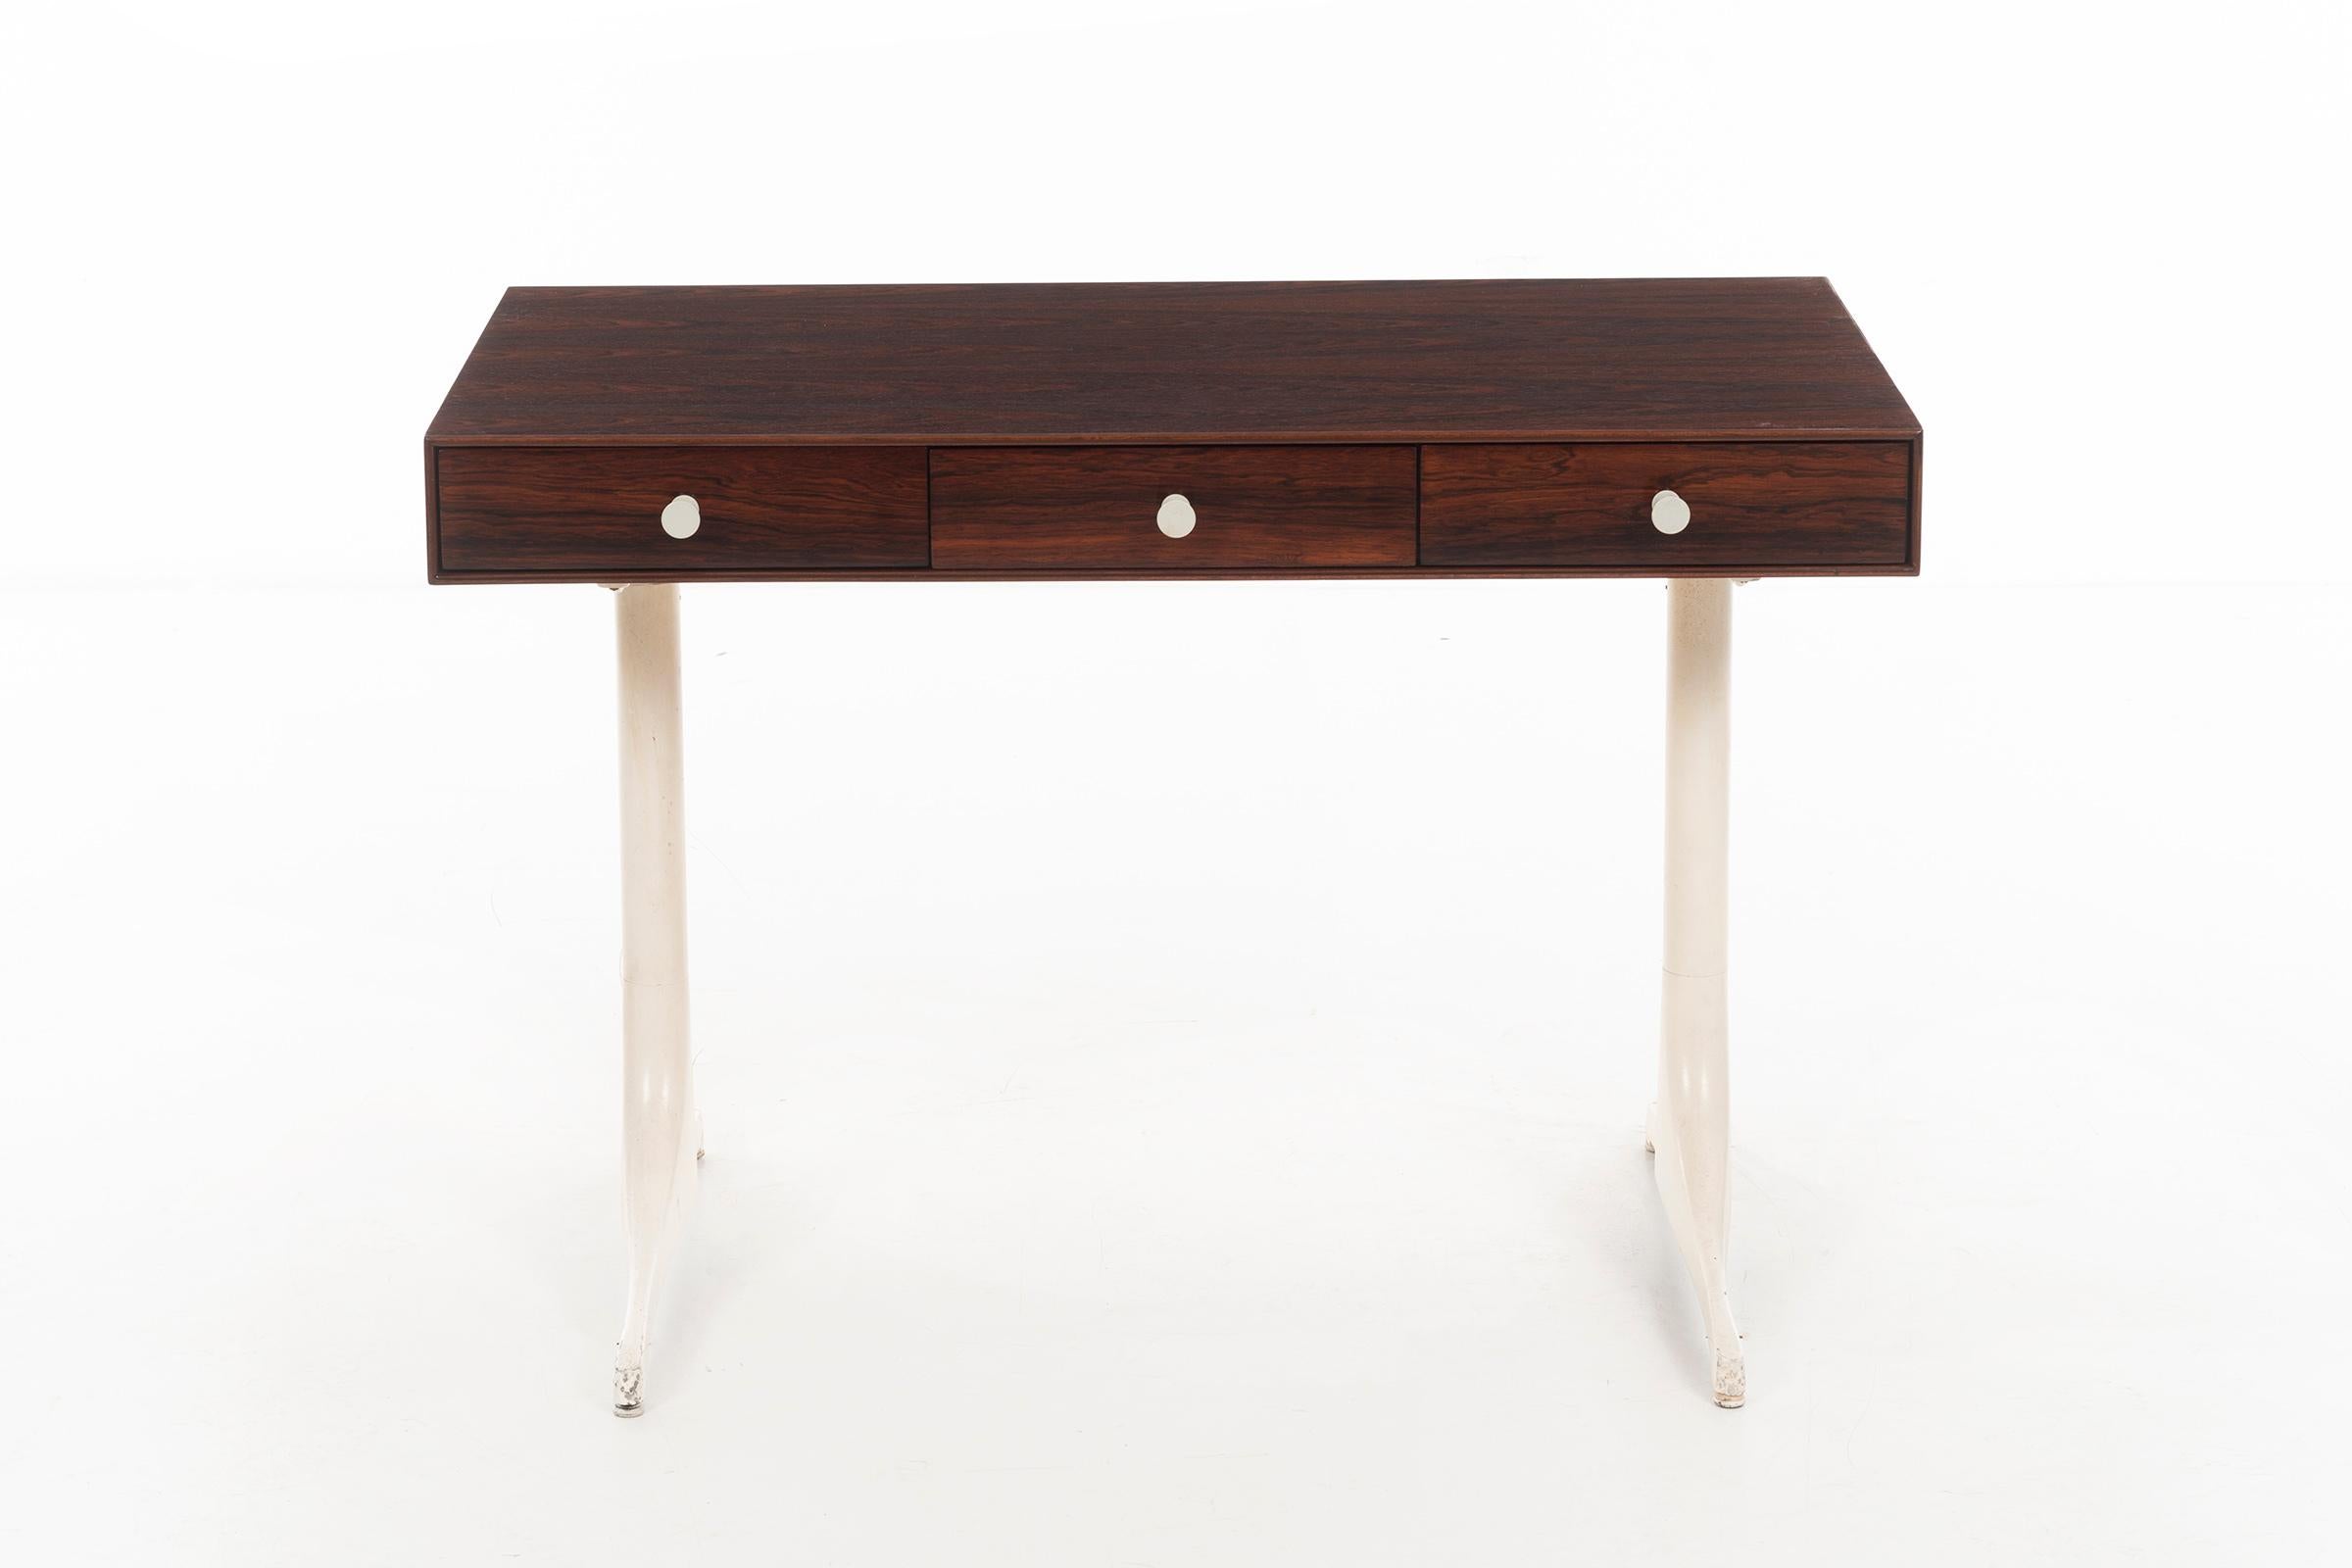 Nelson for Herman Miller, three-drawer desk, model 5494. Deep figured rosewood graining with porcelain pulls and 